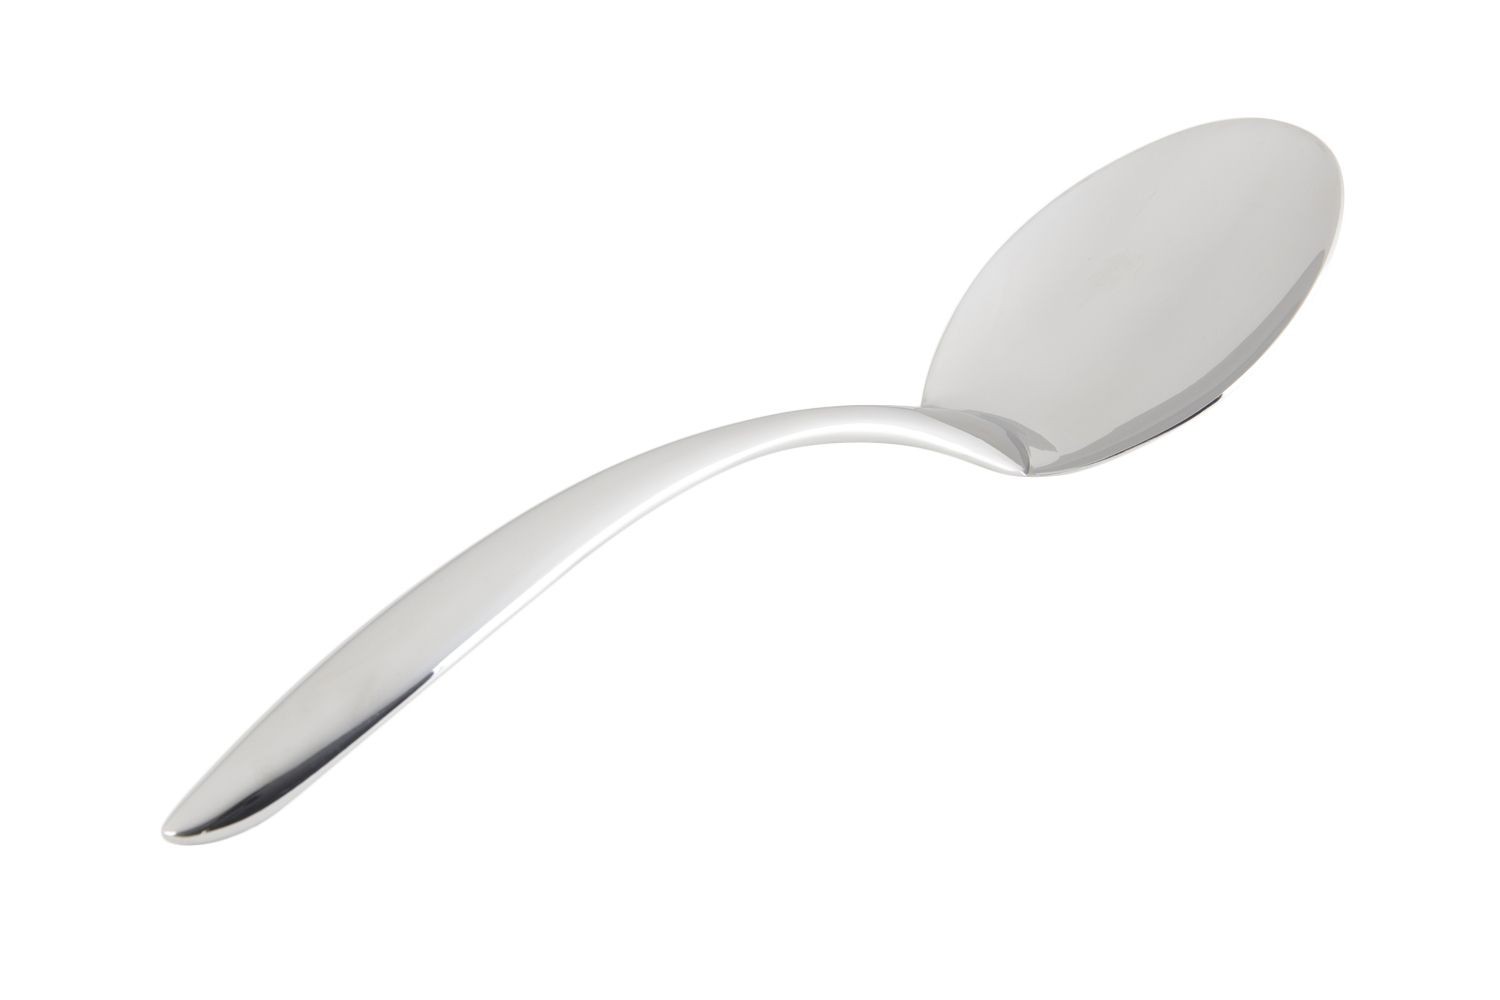 Bon Chef 9643 EZ Use Banquet Serving Solid Spoon with Hollow Cool Handle, 9 3/4"